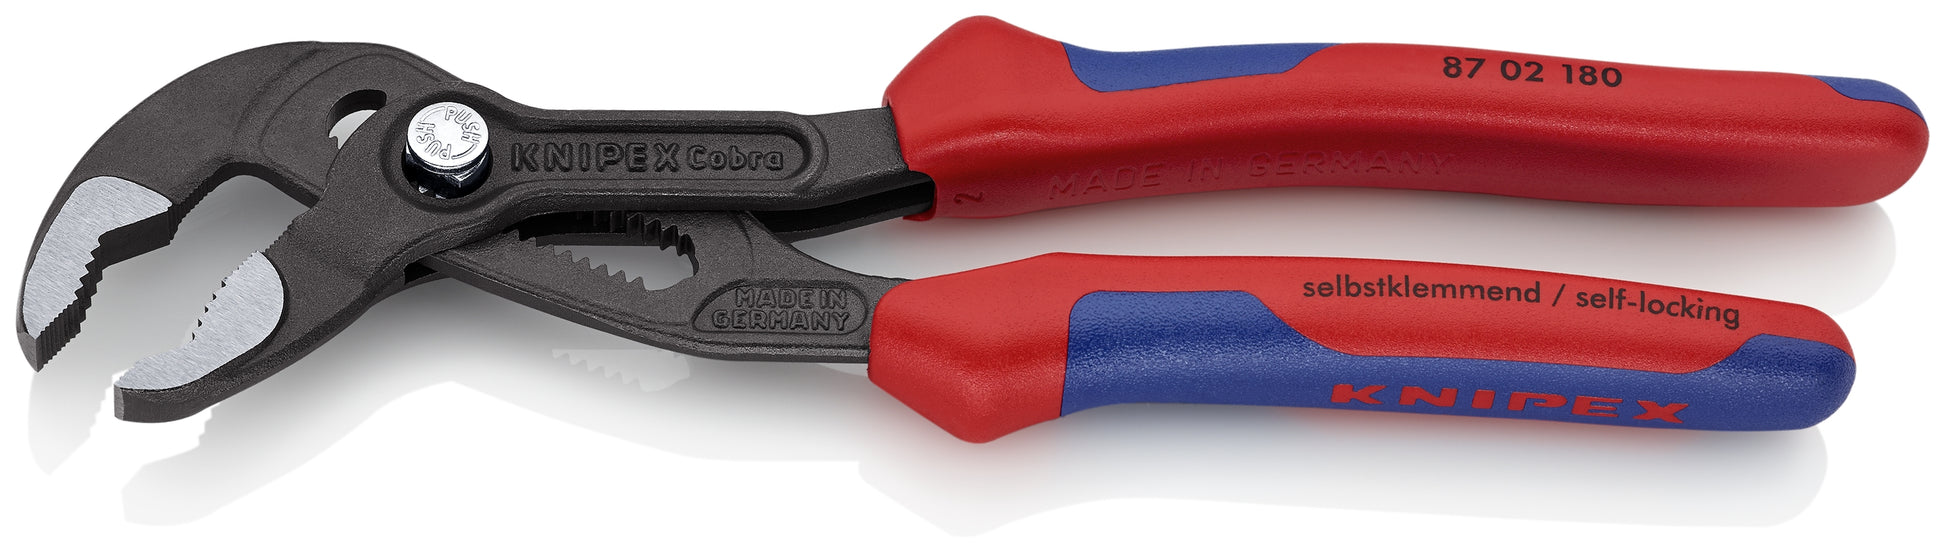 Knipex Water Pump Pliers - Cobra 5 inches